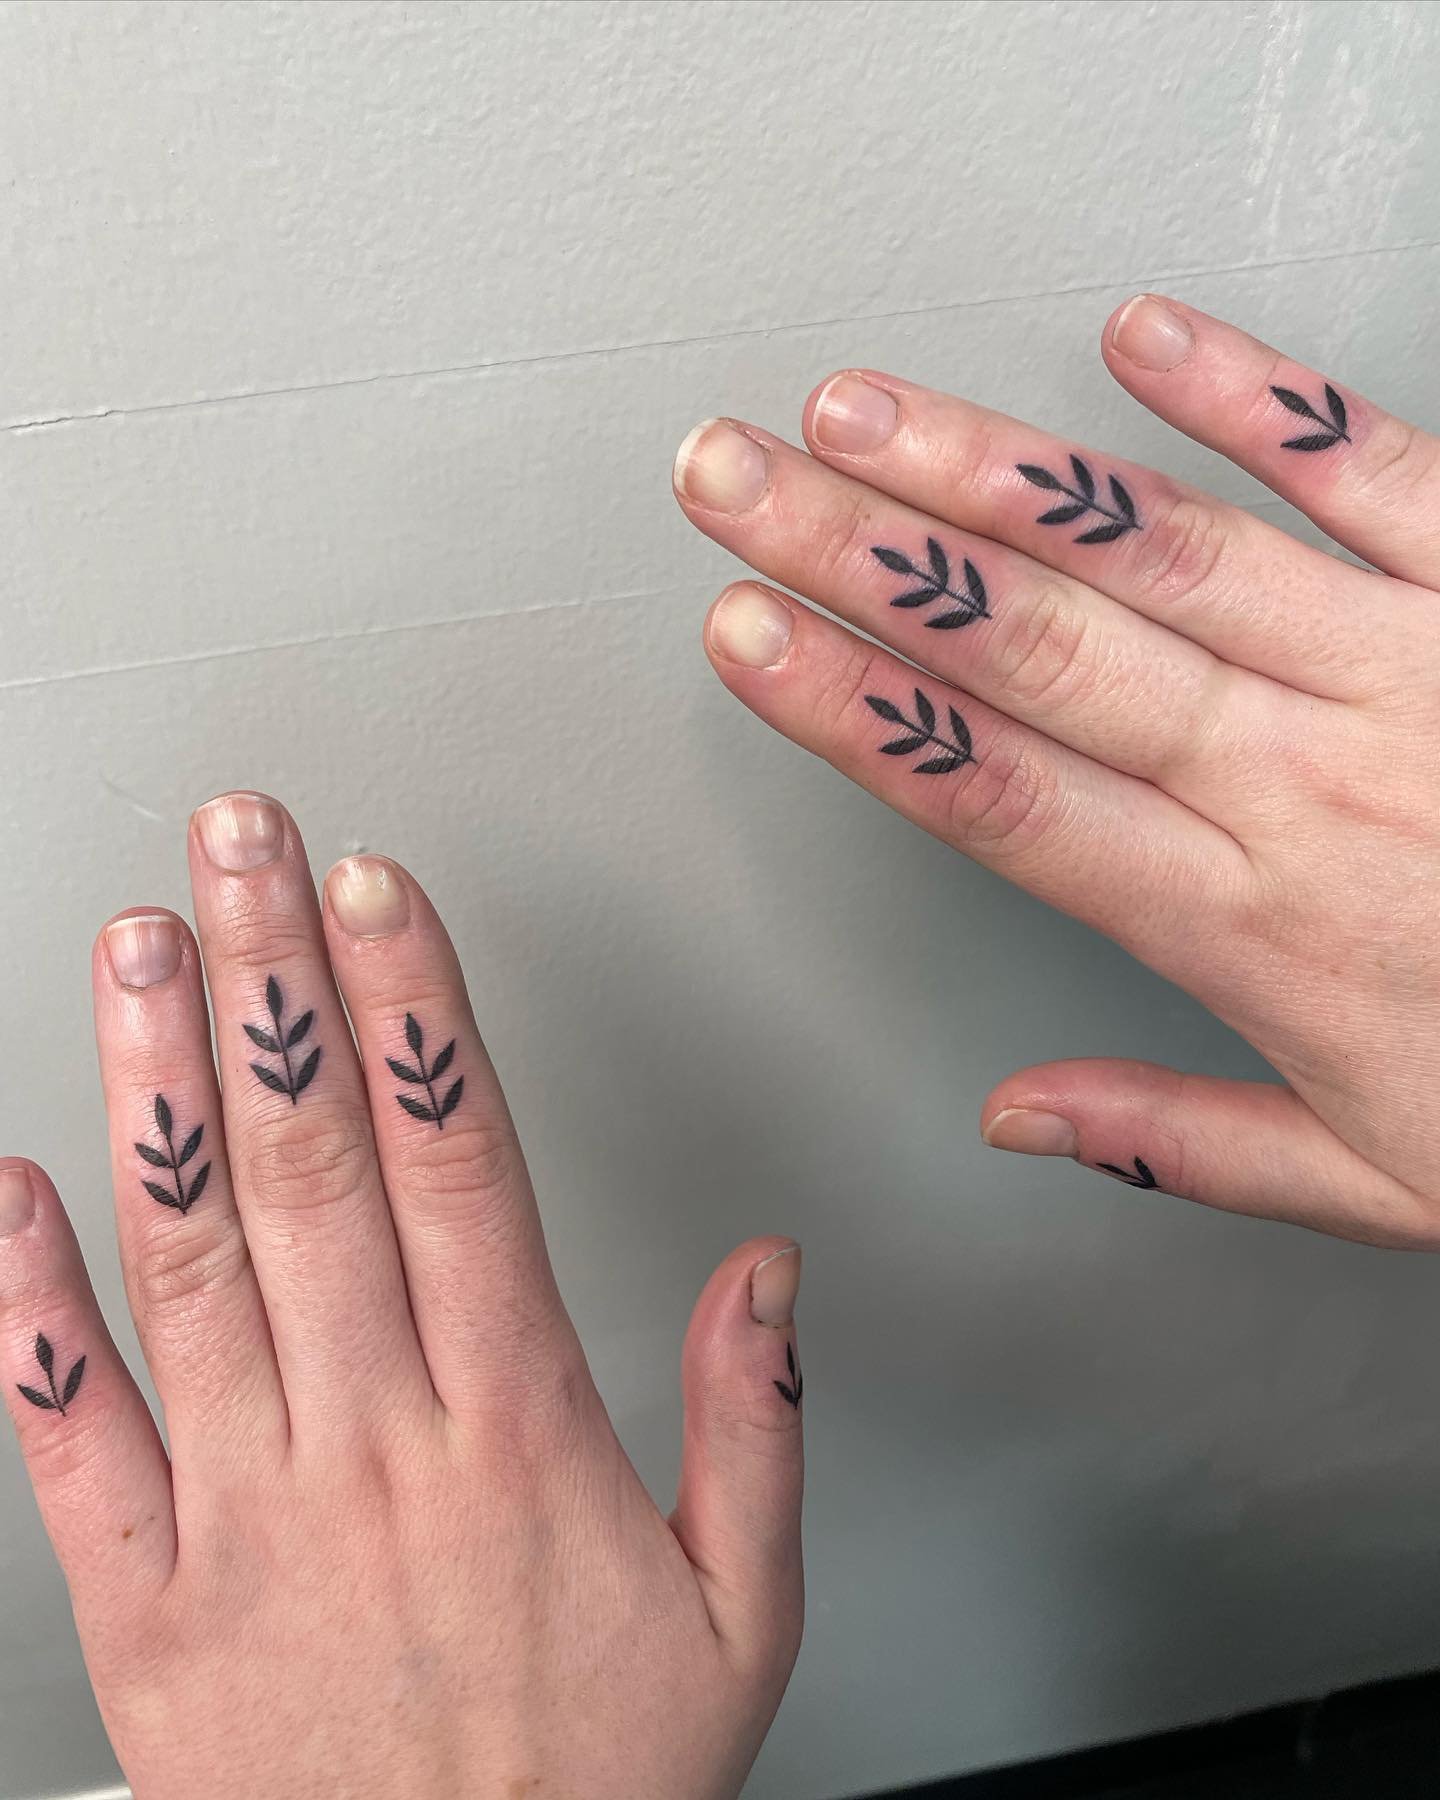 extremely excited with how these came out 🩵🌱 i appreciate your trust lauren! thanks for bringing me things to be meticulous about! #fingertattoos #leaftattoo #ornamentaltattoo #worcesterma